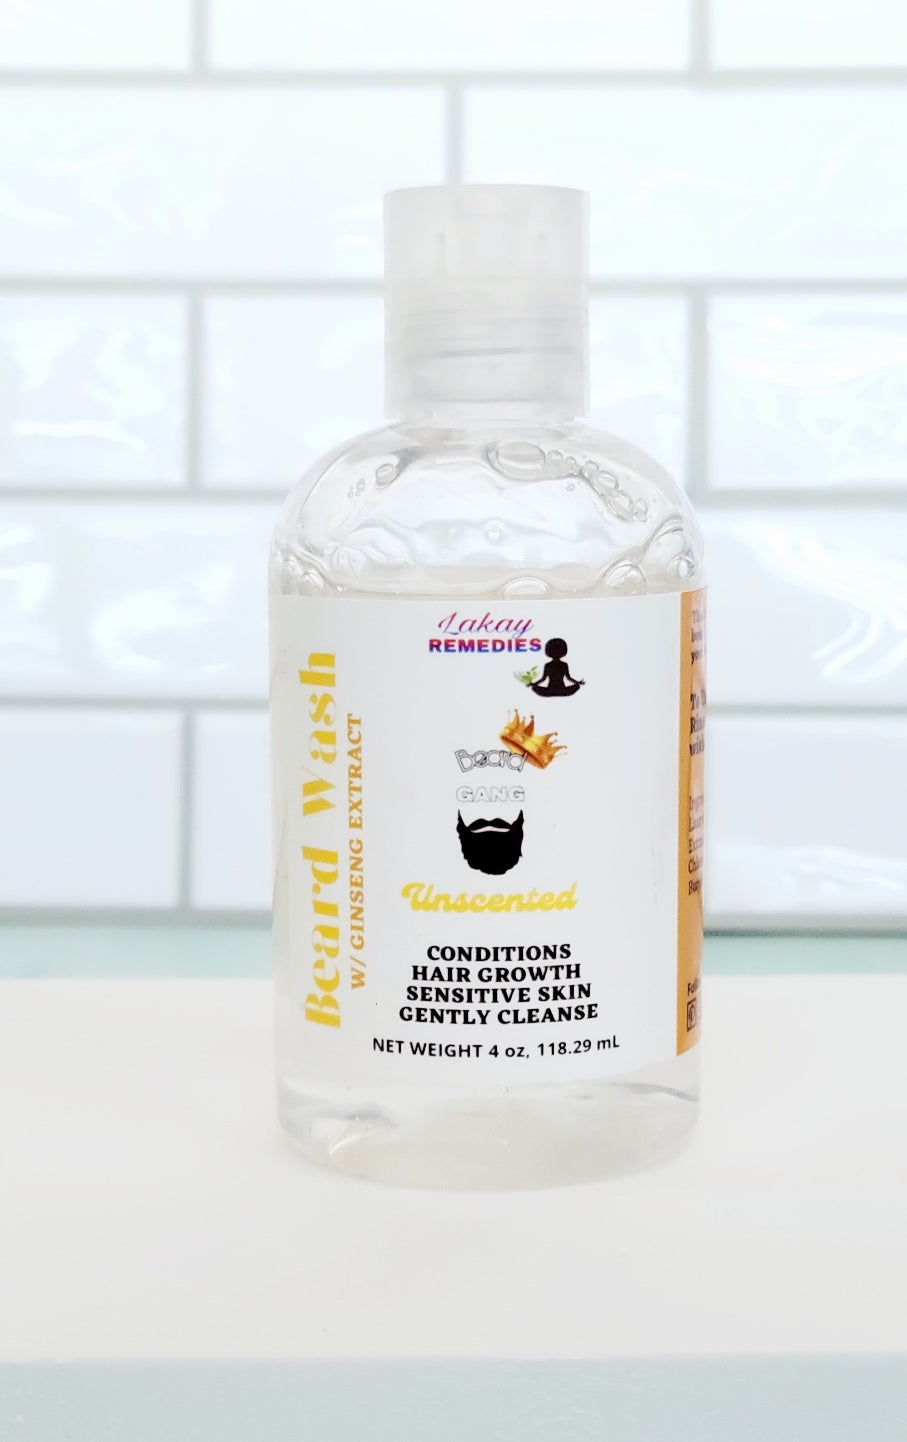 Beard Gang Unscented Beard Wash with Ginseng Extract